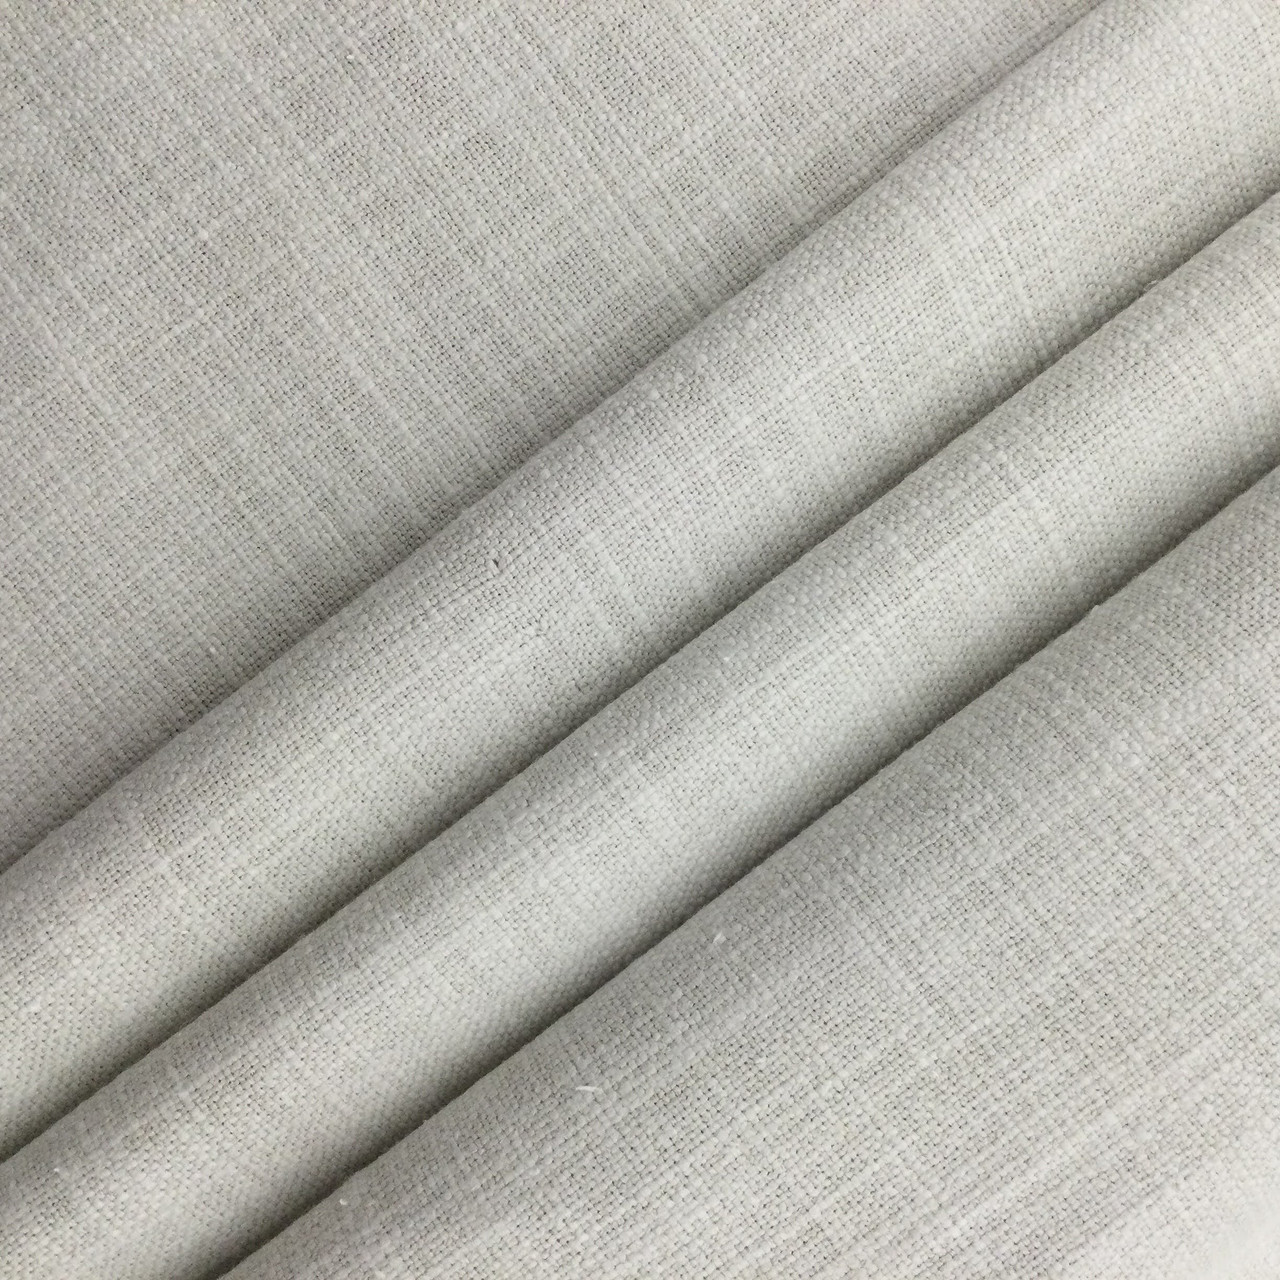 Fabrics By Use - Color: Beige, Grey, Ivory